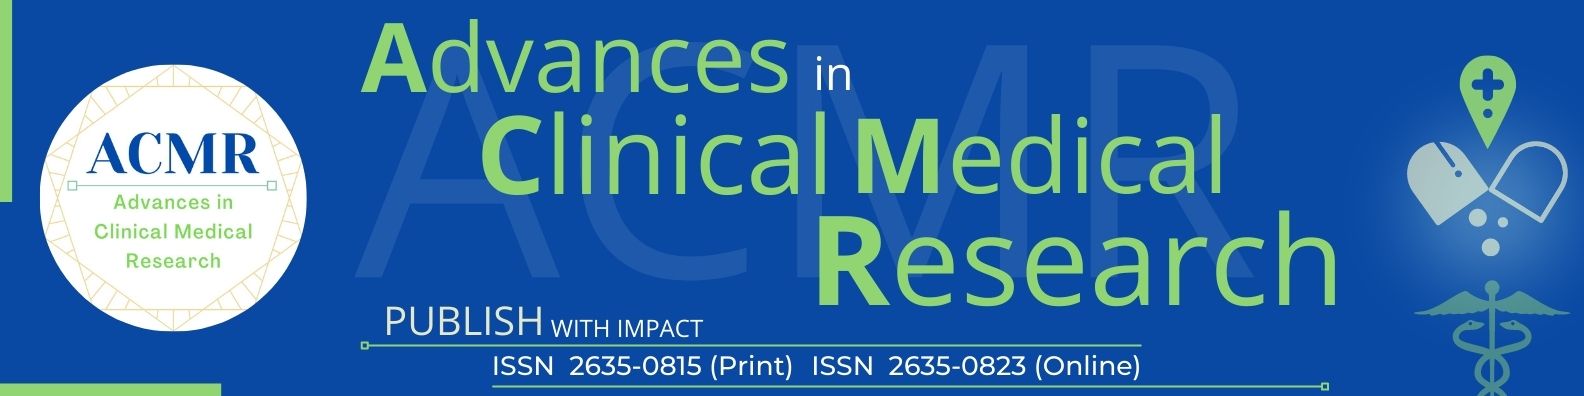 Advances in Clinical Medical Research (ACMR)